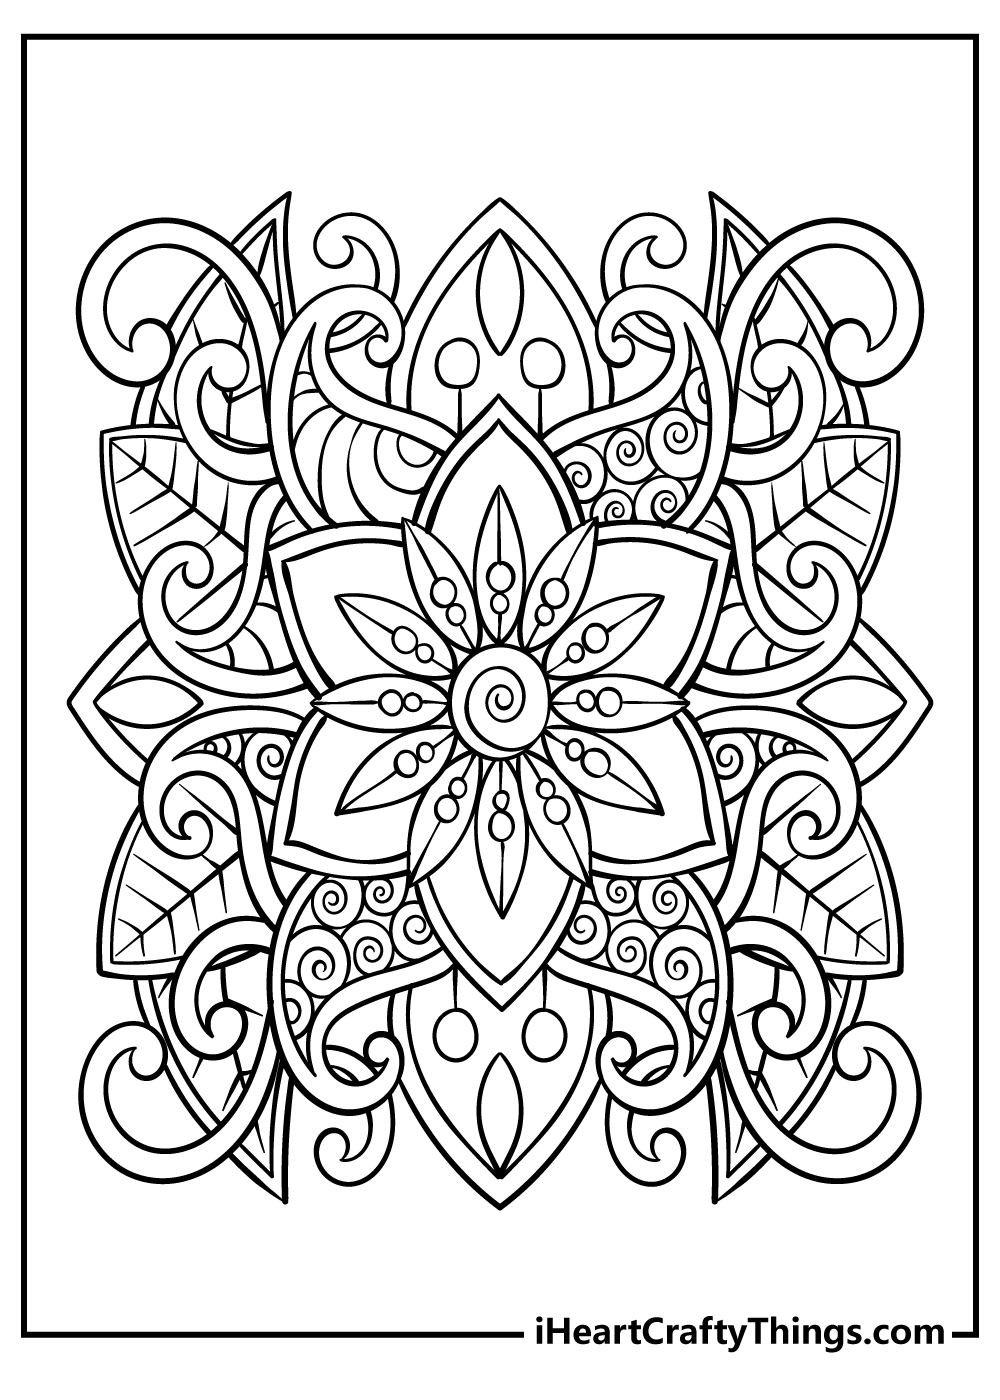 Adult coloring pages updated free printables